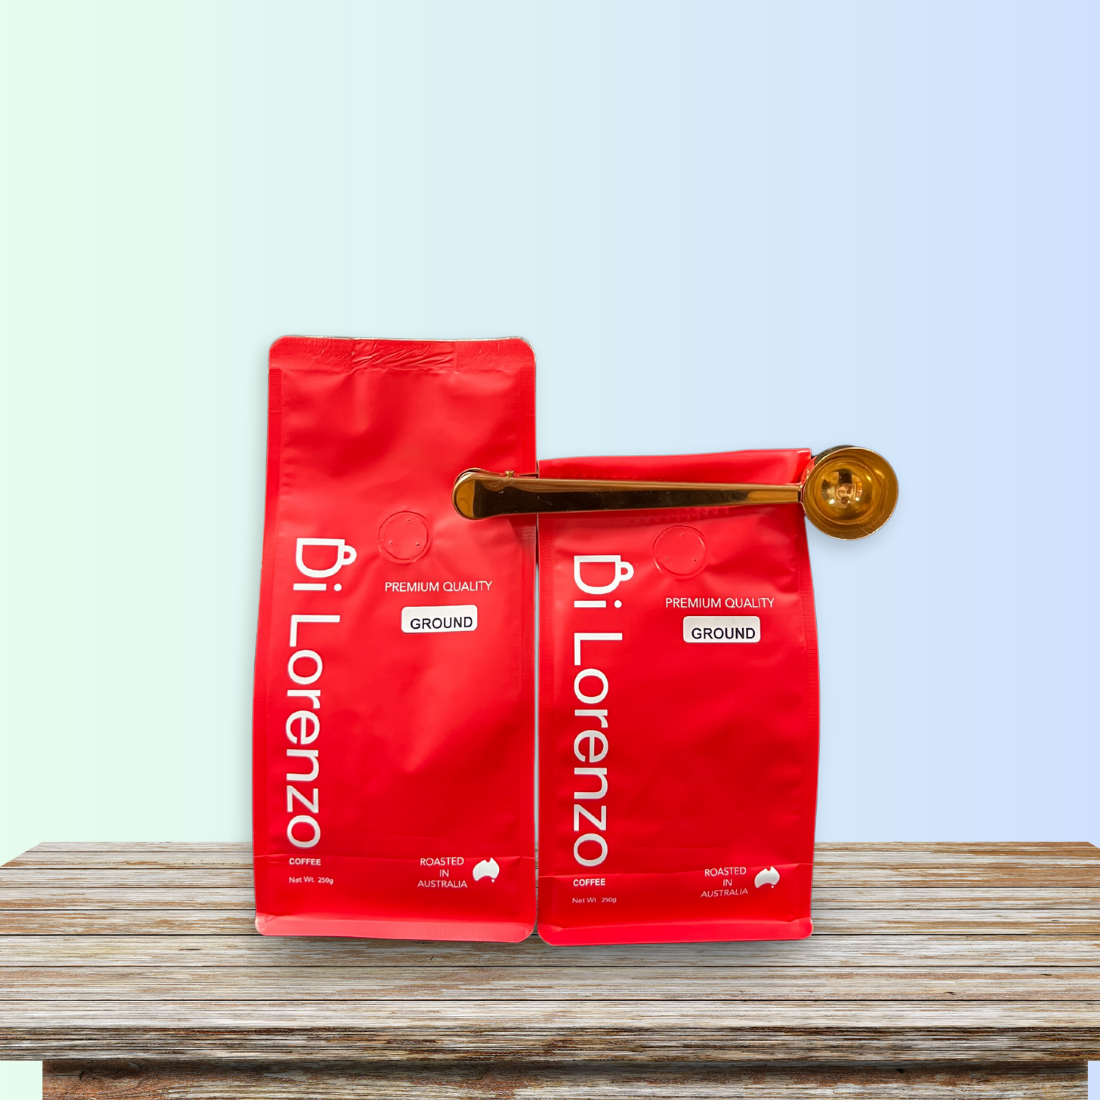 A bright red bag of Di Lorenzo freshly roasted and ground coffee paired with a stainless steel scoop clip, ensuring freshness, displayed on a wooden table with a soft blue gradient background.